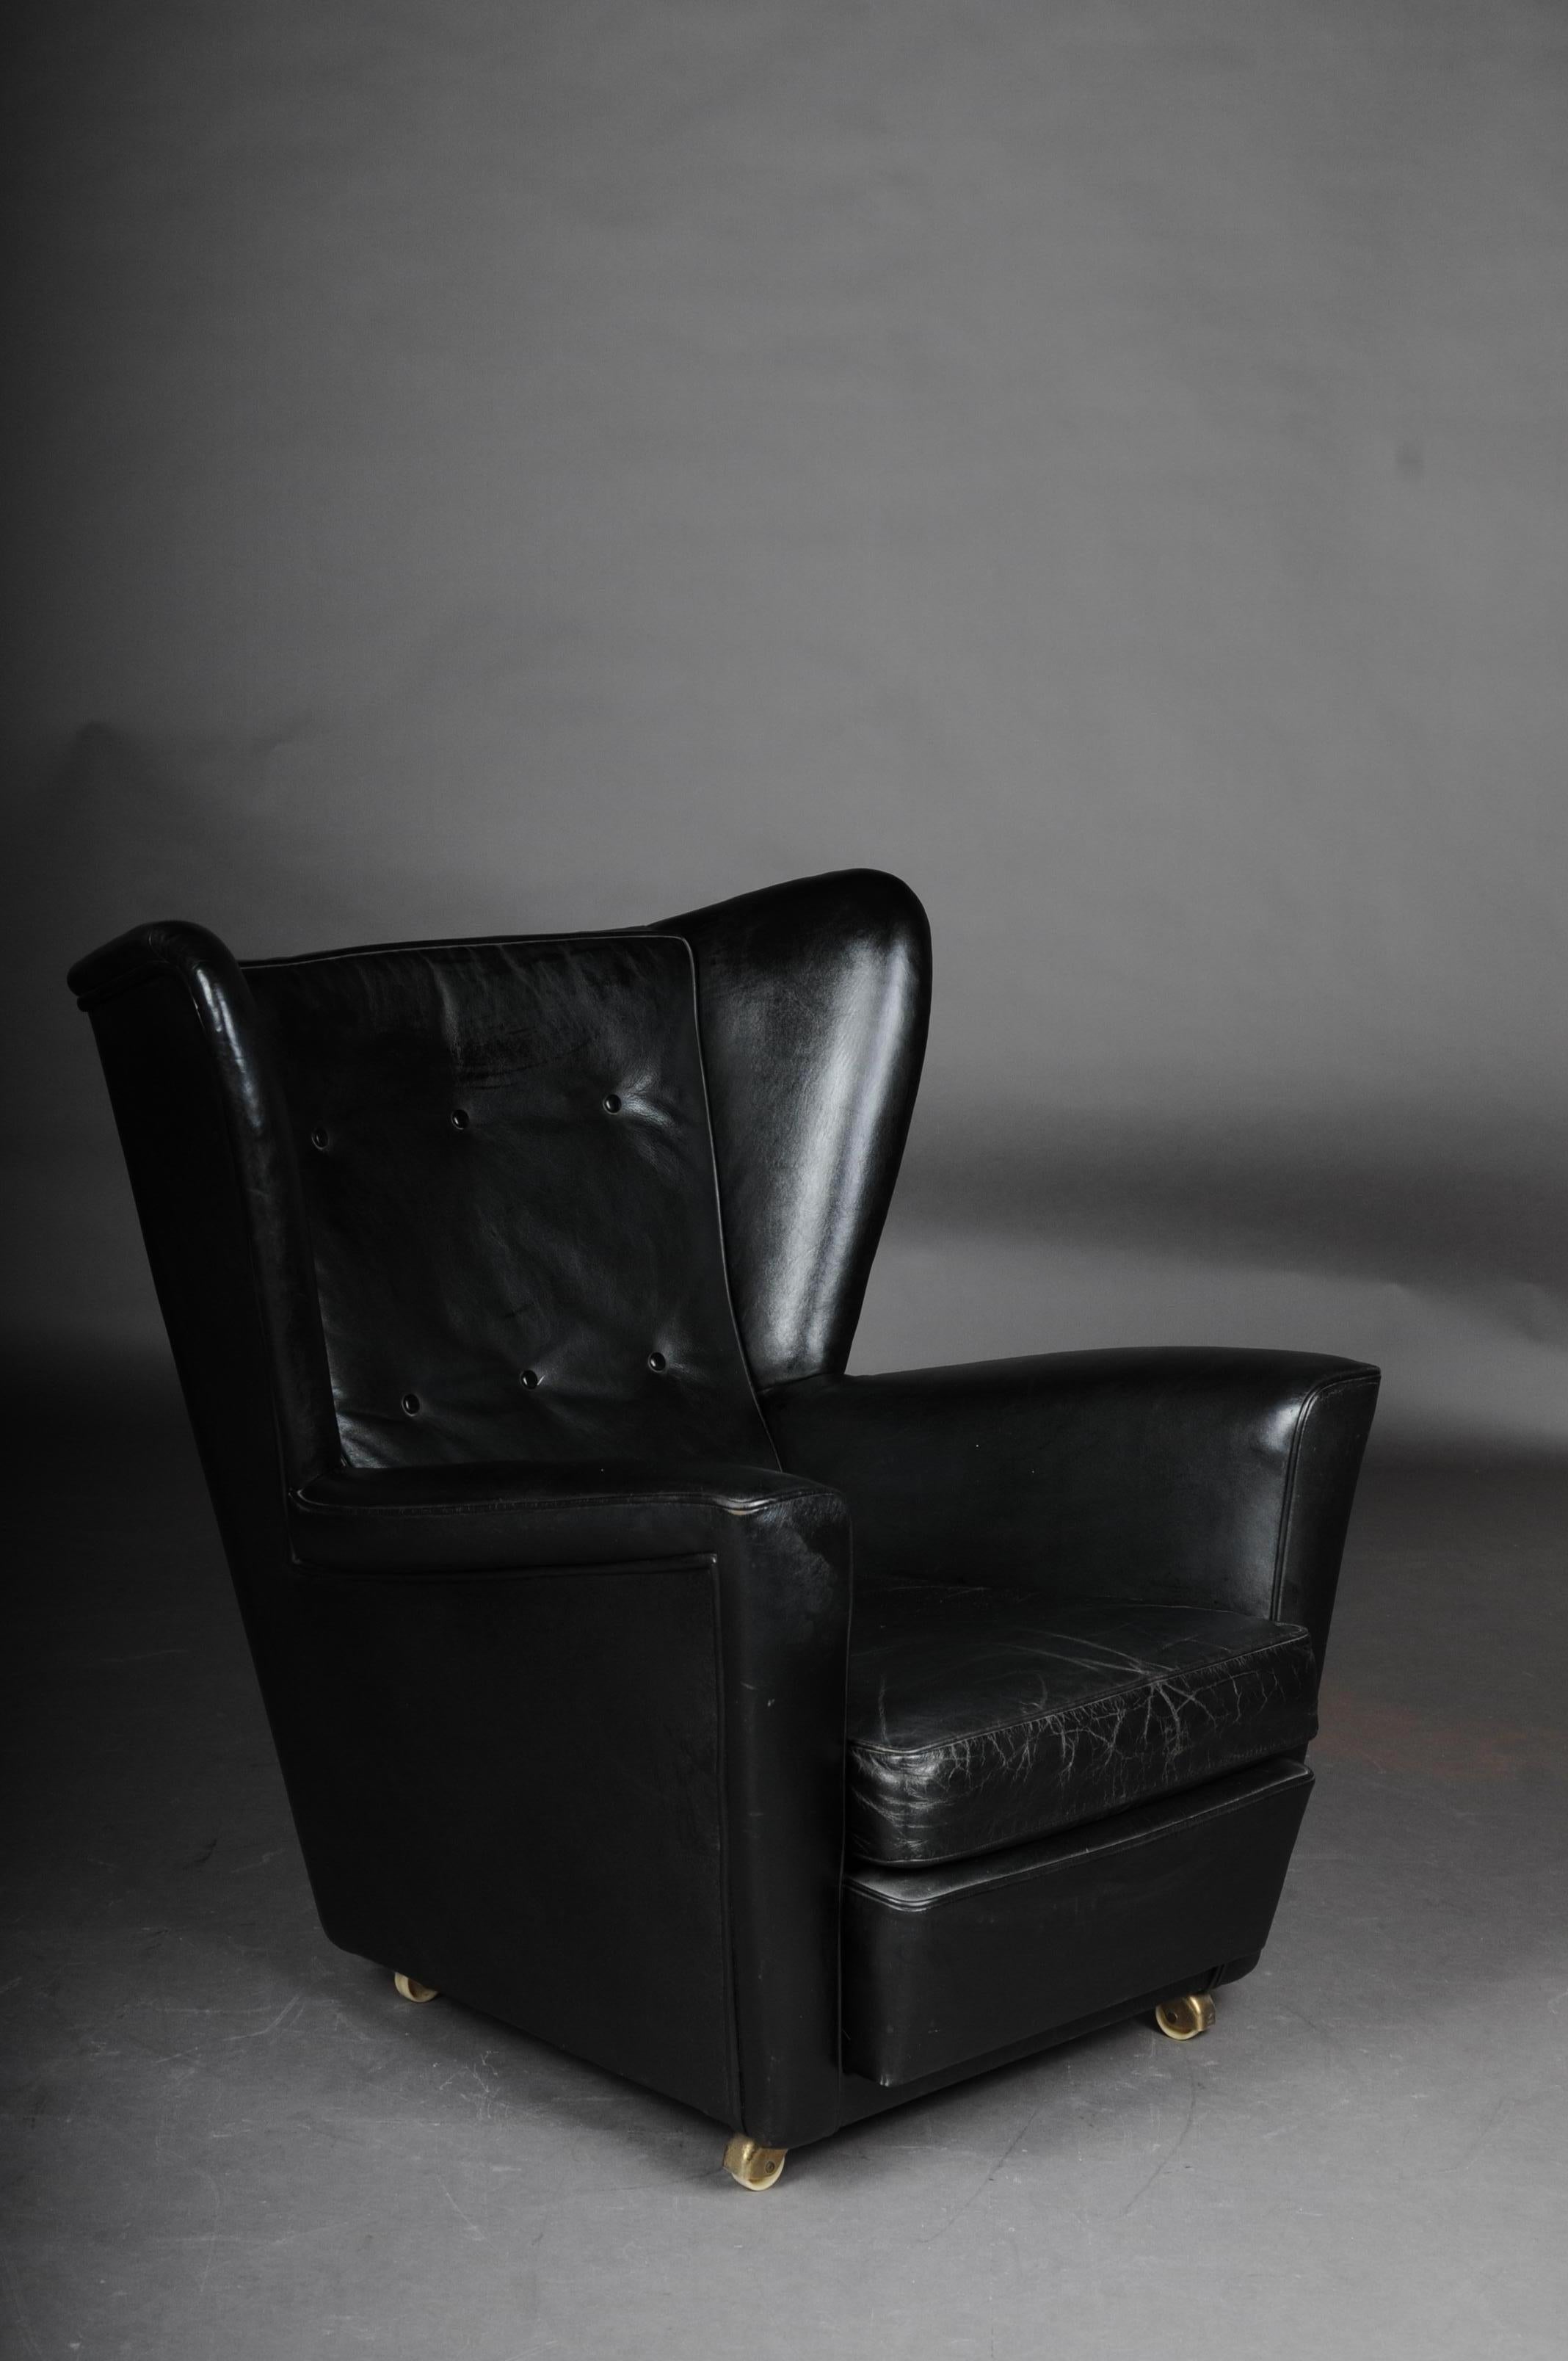 Vintage club armchair, upholstered 1960s-1970s leather

Labeled from London. Full leather covered upholstered chair, vintage 1960s-1970s. The upholstered chair, which convinces with its simple elegance, is an eye-catcher in every interior. An